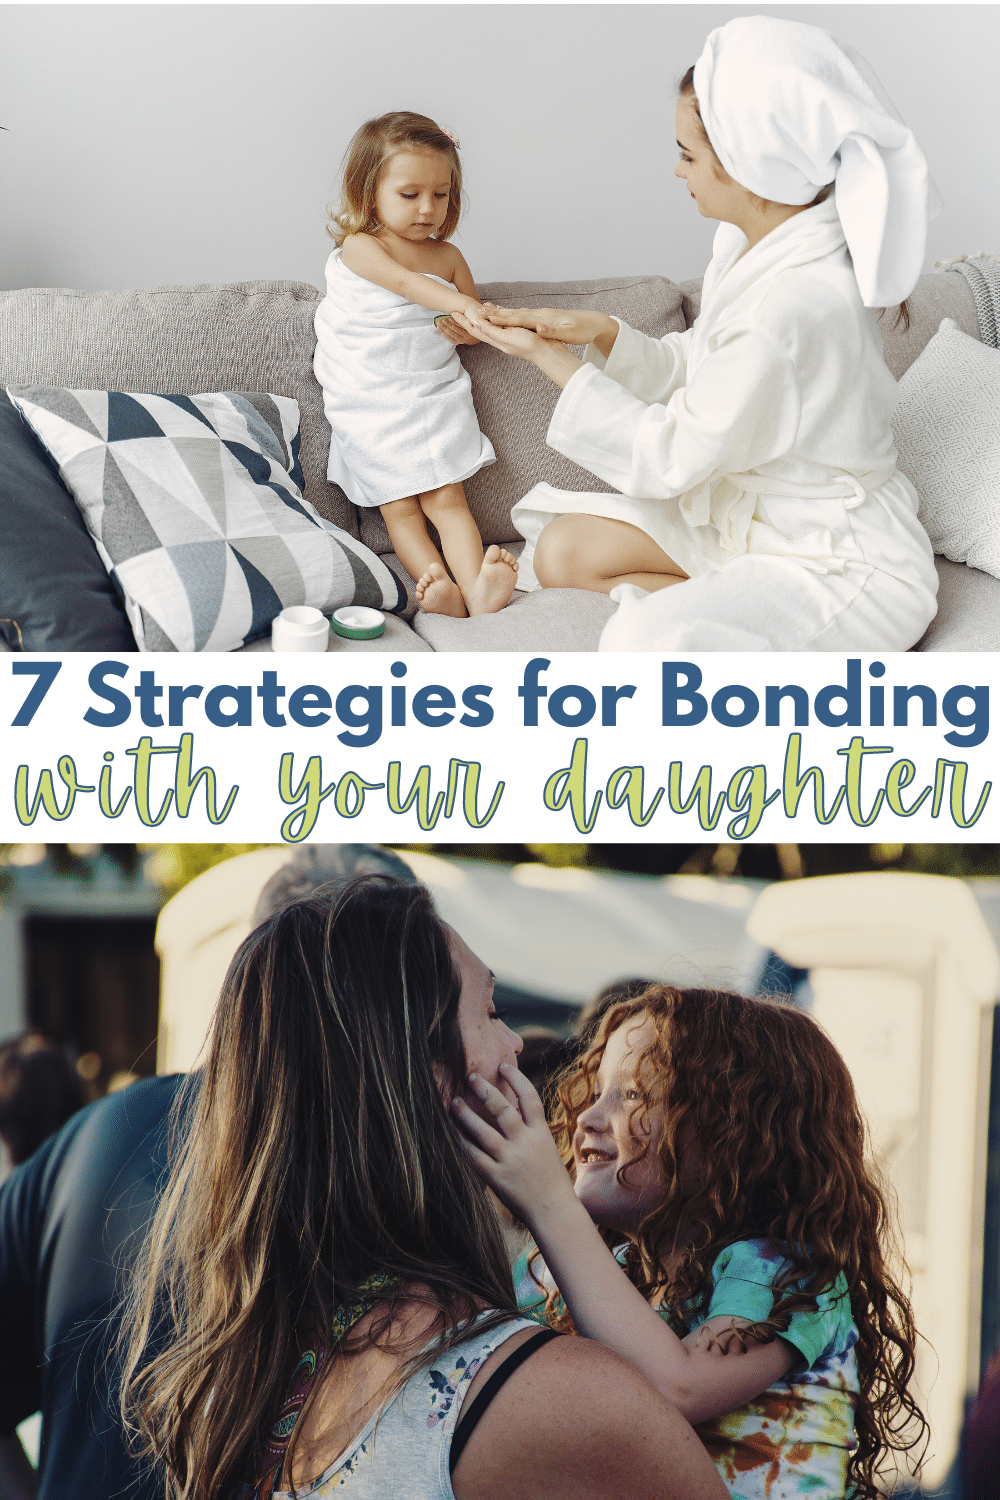 A mother & daughter relationship is special. Here are simple strategies for bonding with your daughter to make the most of that relationship. #motherdaughterrelationship #motherdaughter #momlife via @wondermomwannab